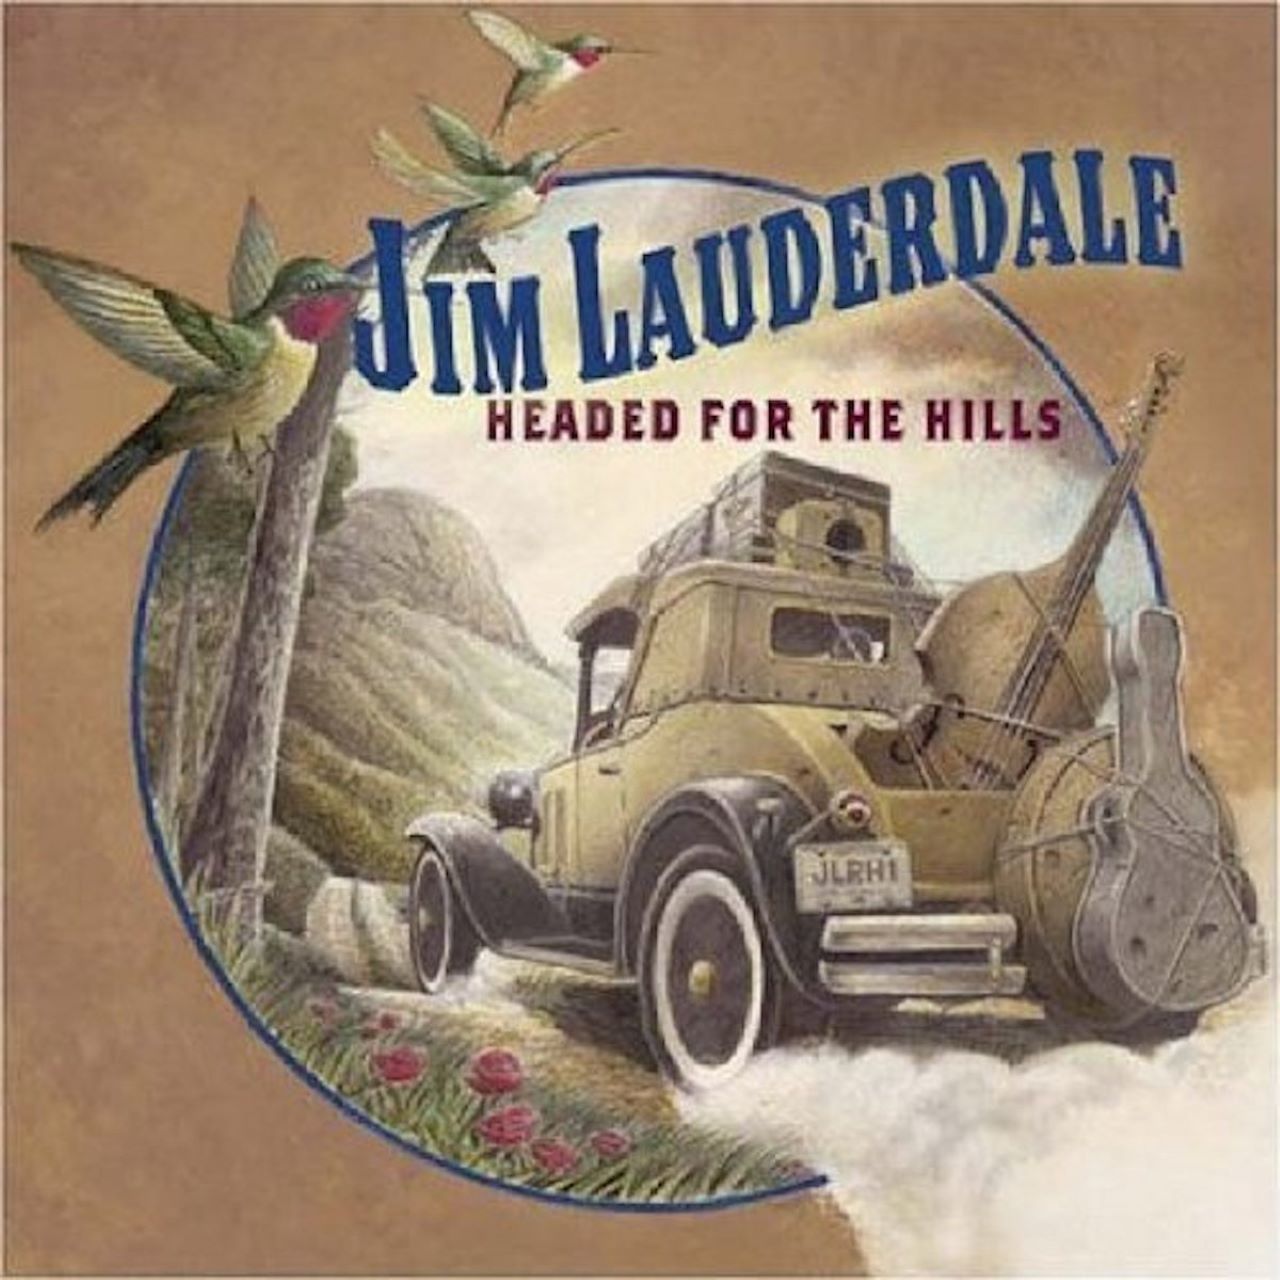 Jim Lauderdale - Headed For The Hills cover album